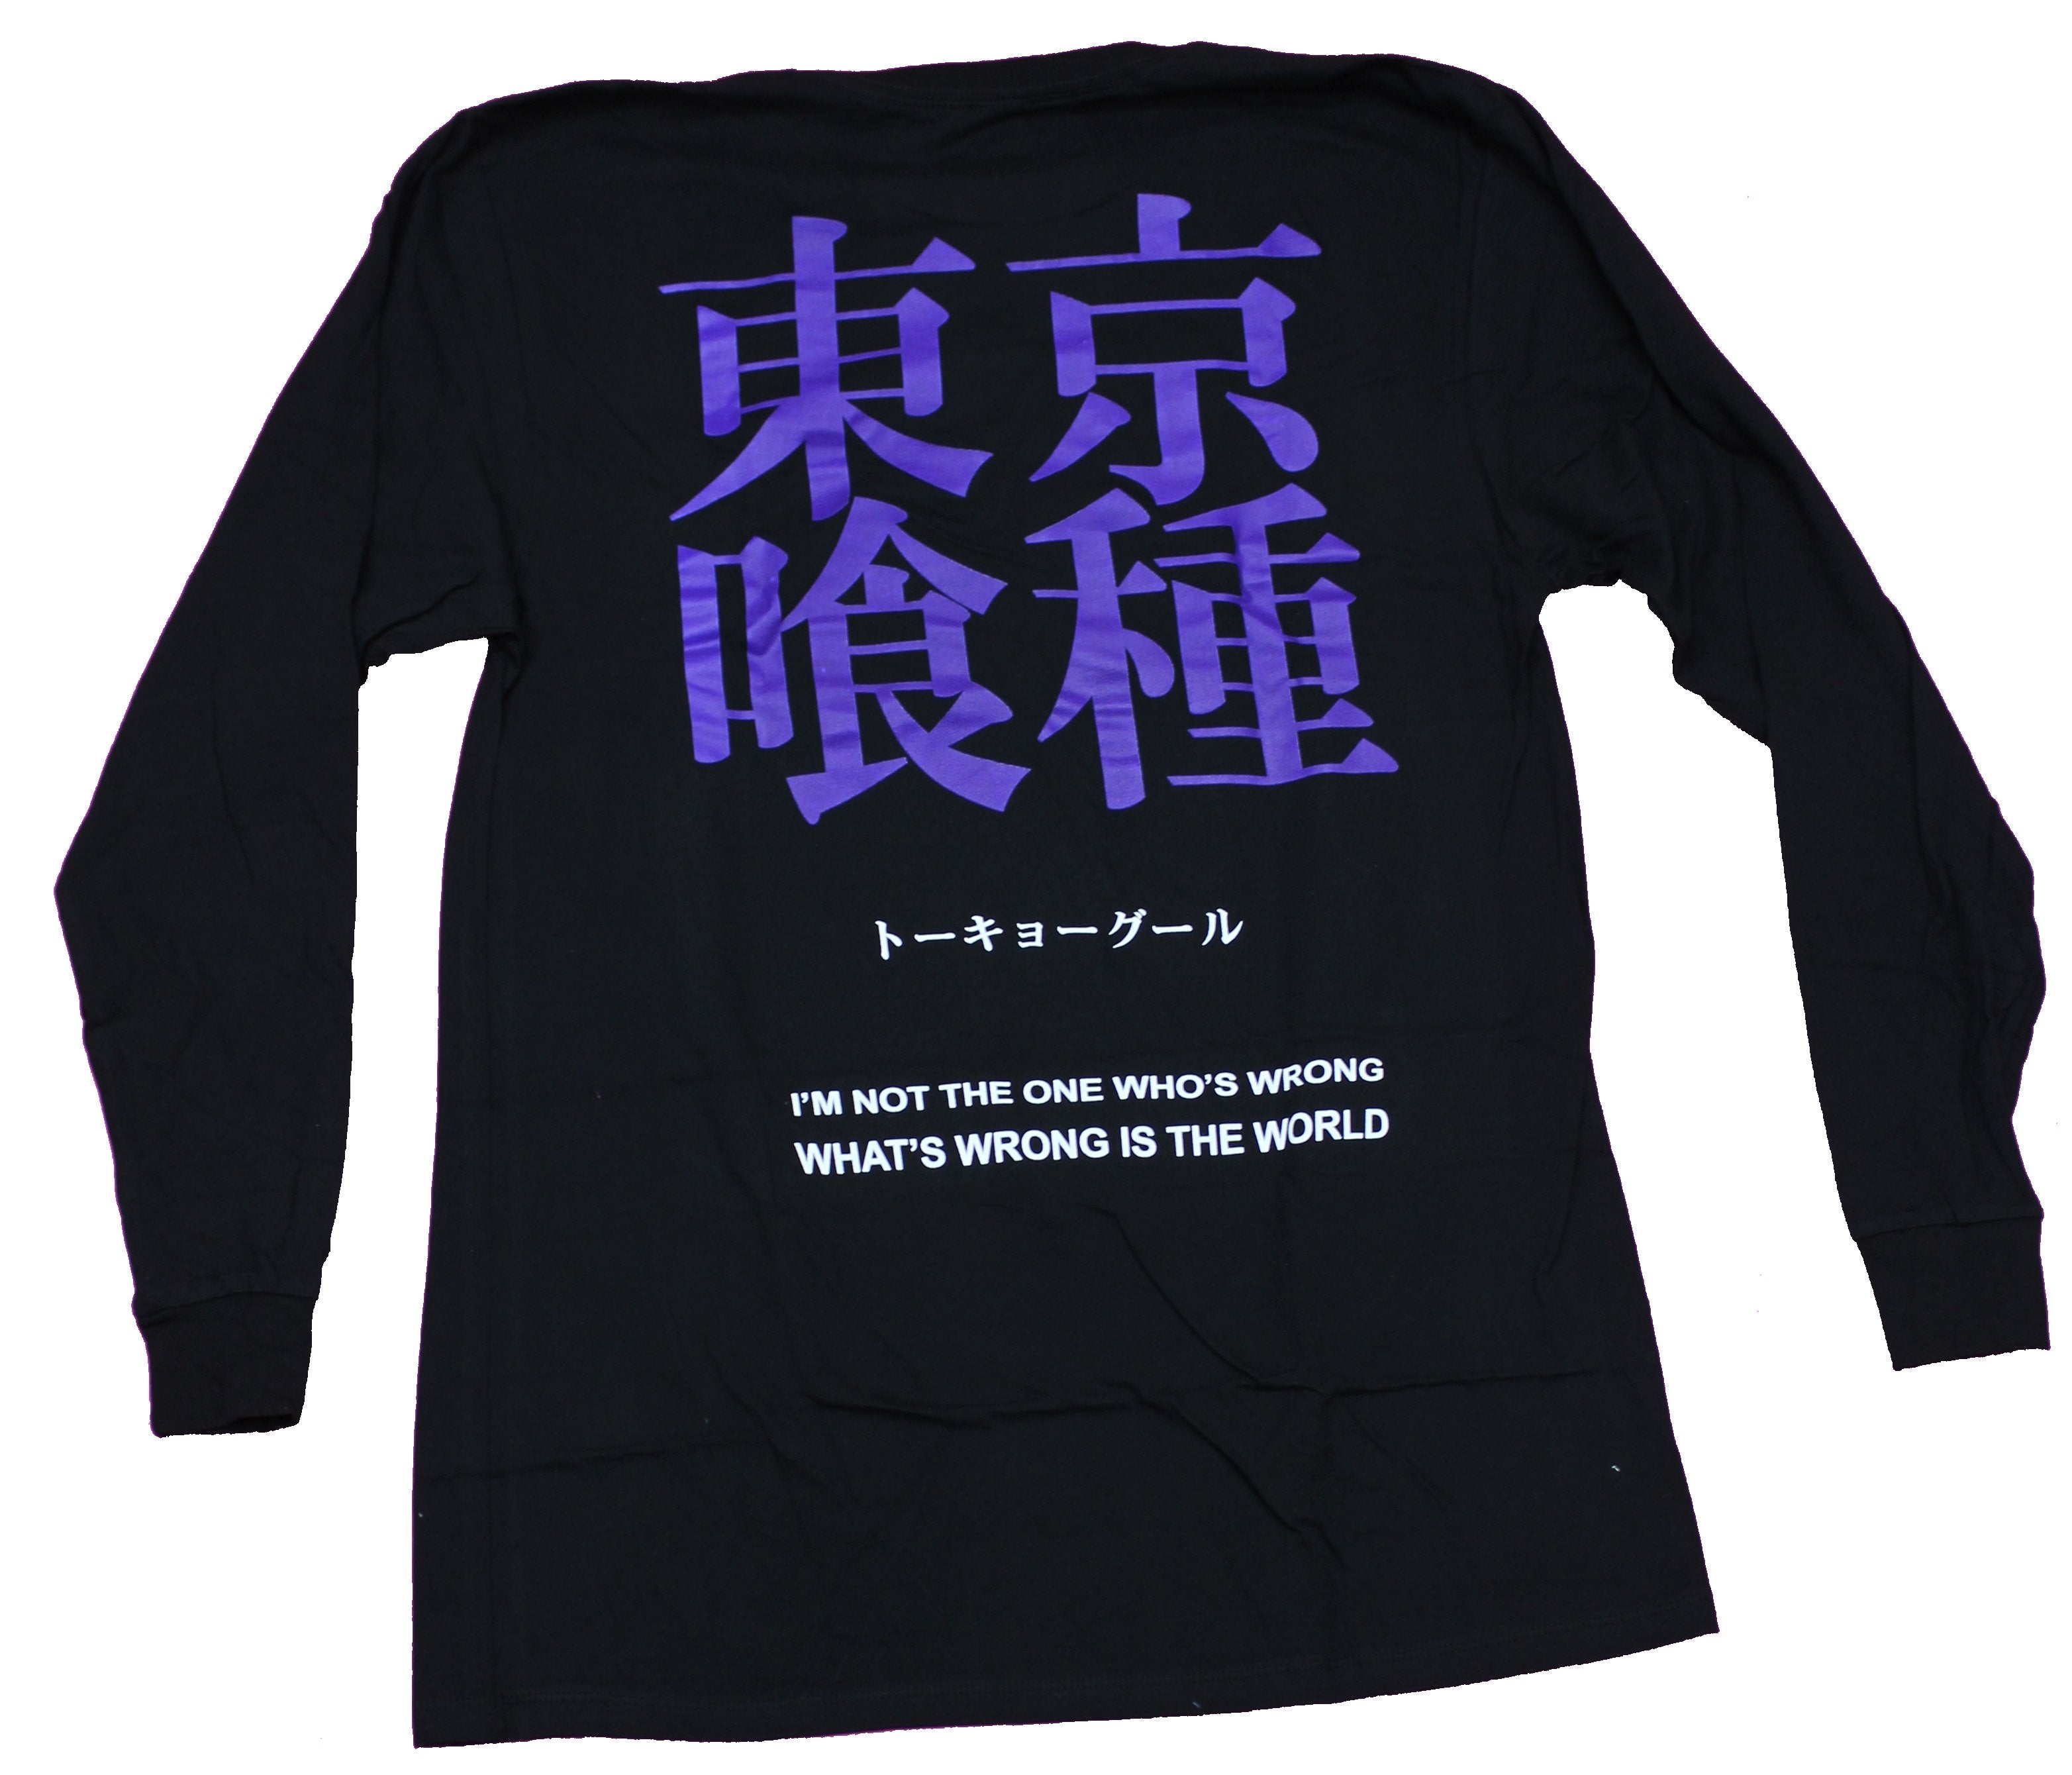 Tokyo Ghoul Mens Long Sleeve T-Shirt - Ghoul Suited Image Under Ghoul